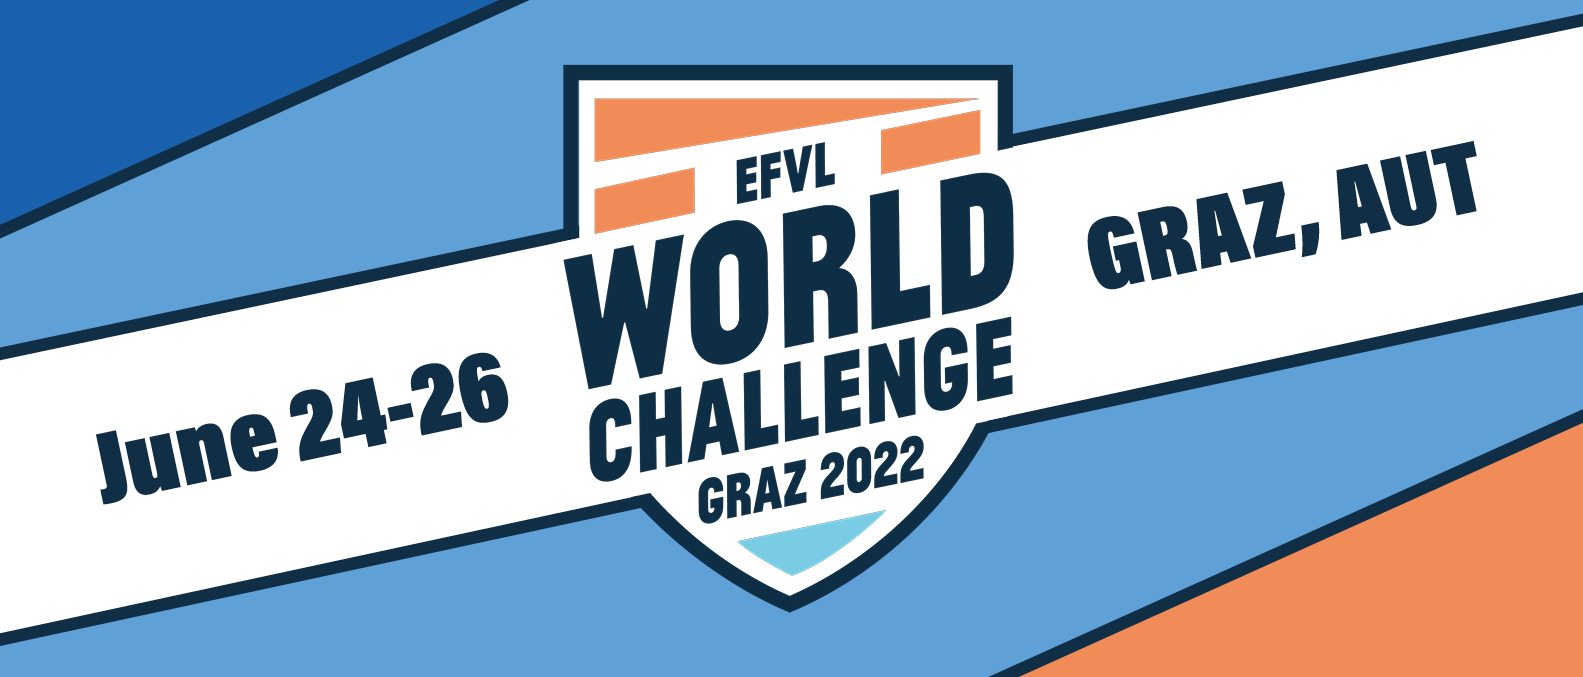 Ready for the EFVL World Challenge?